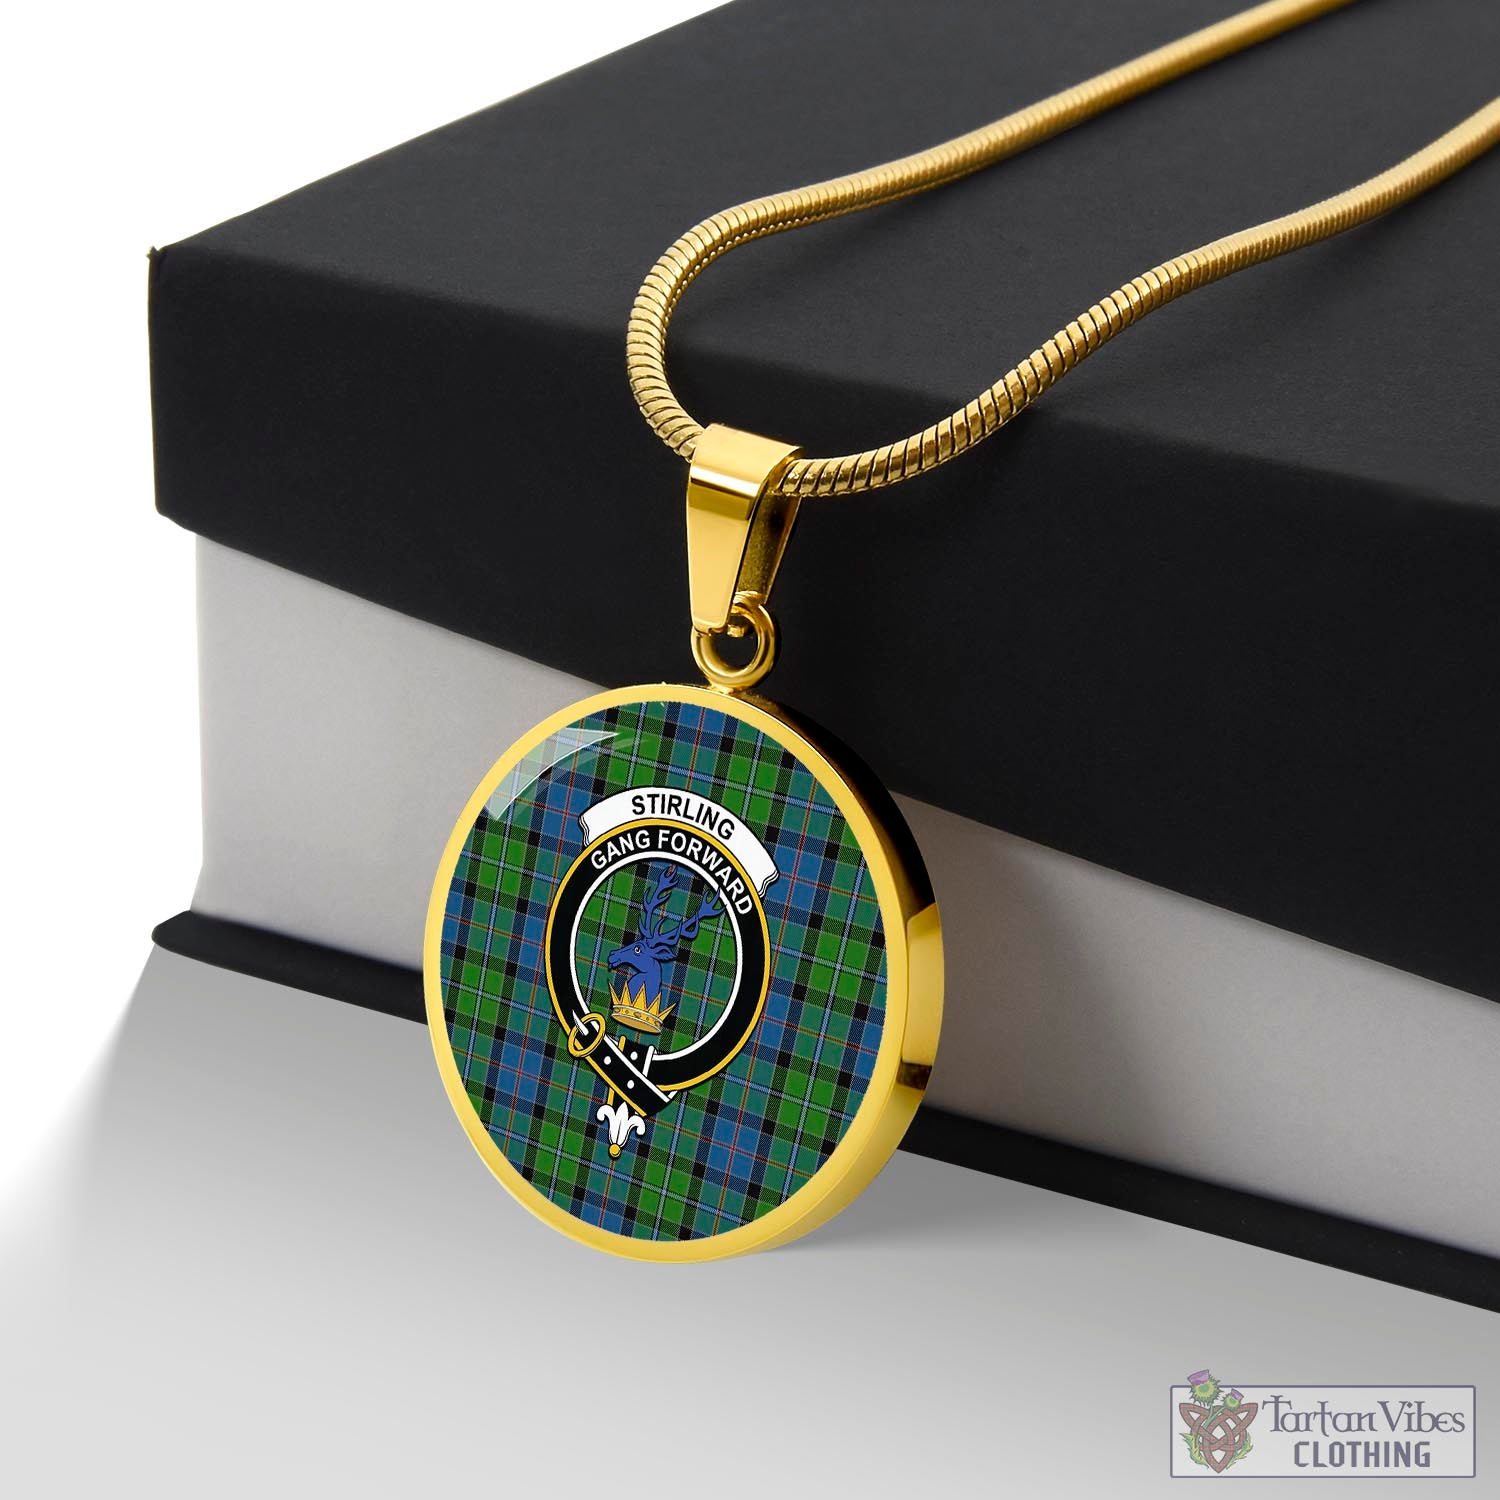 Tartan Vibes Clothing Stirling Tartan Circle Necklace with Family Crest